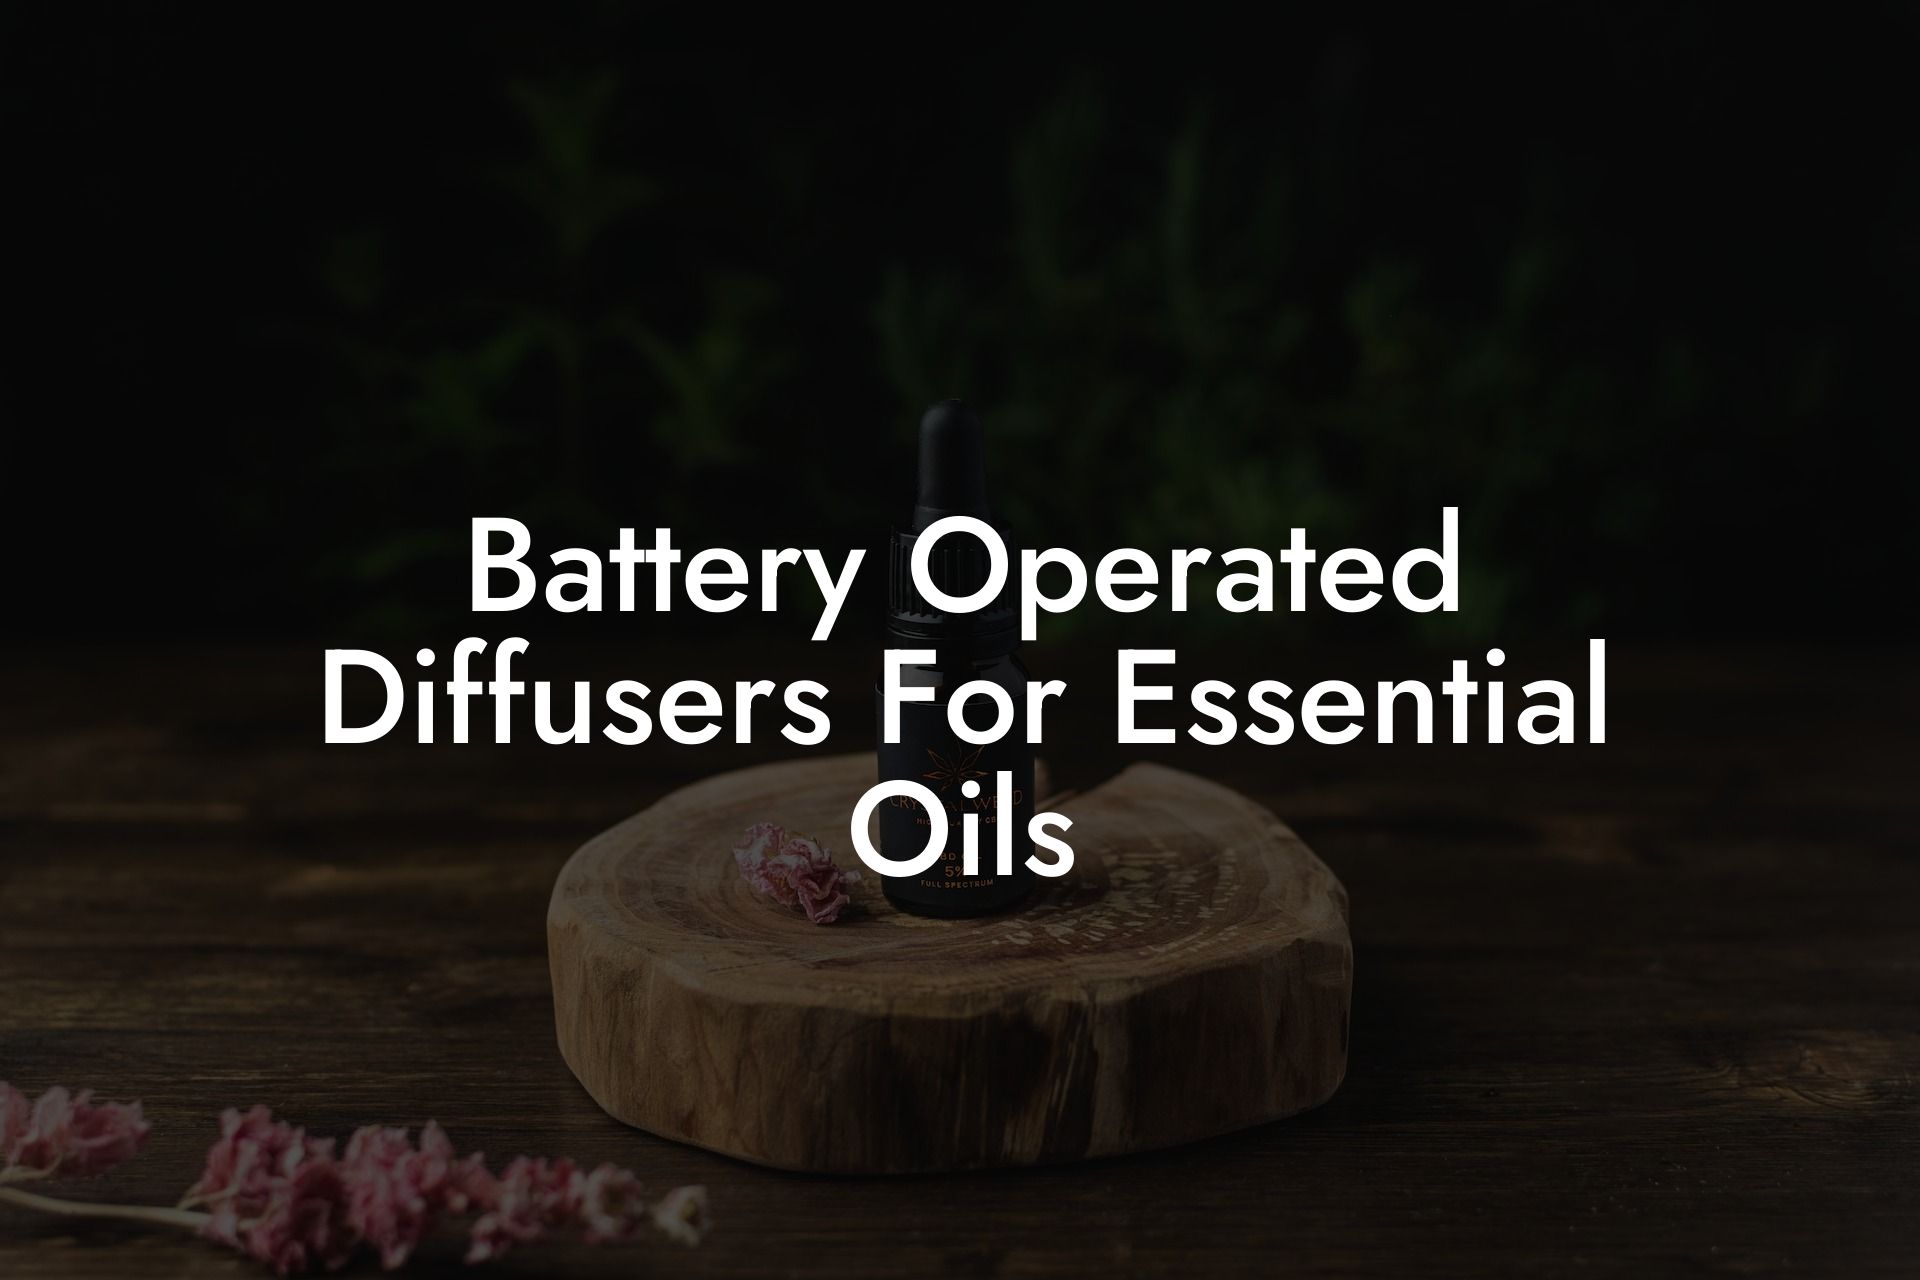 Battery Operated Diffusers For Essential Oils